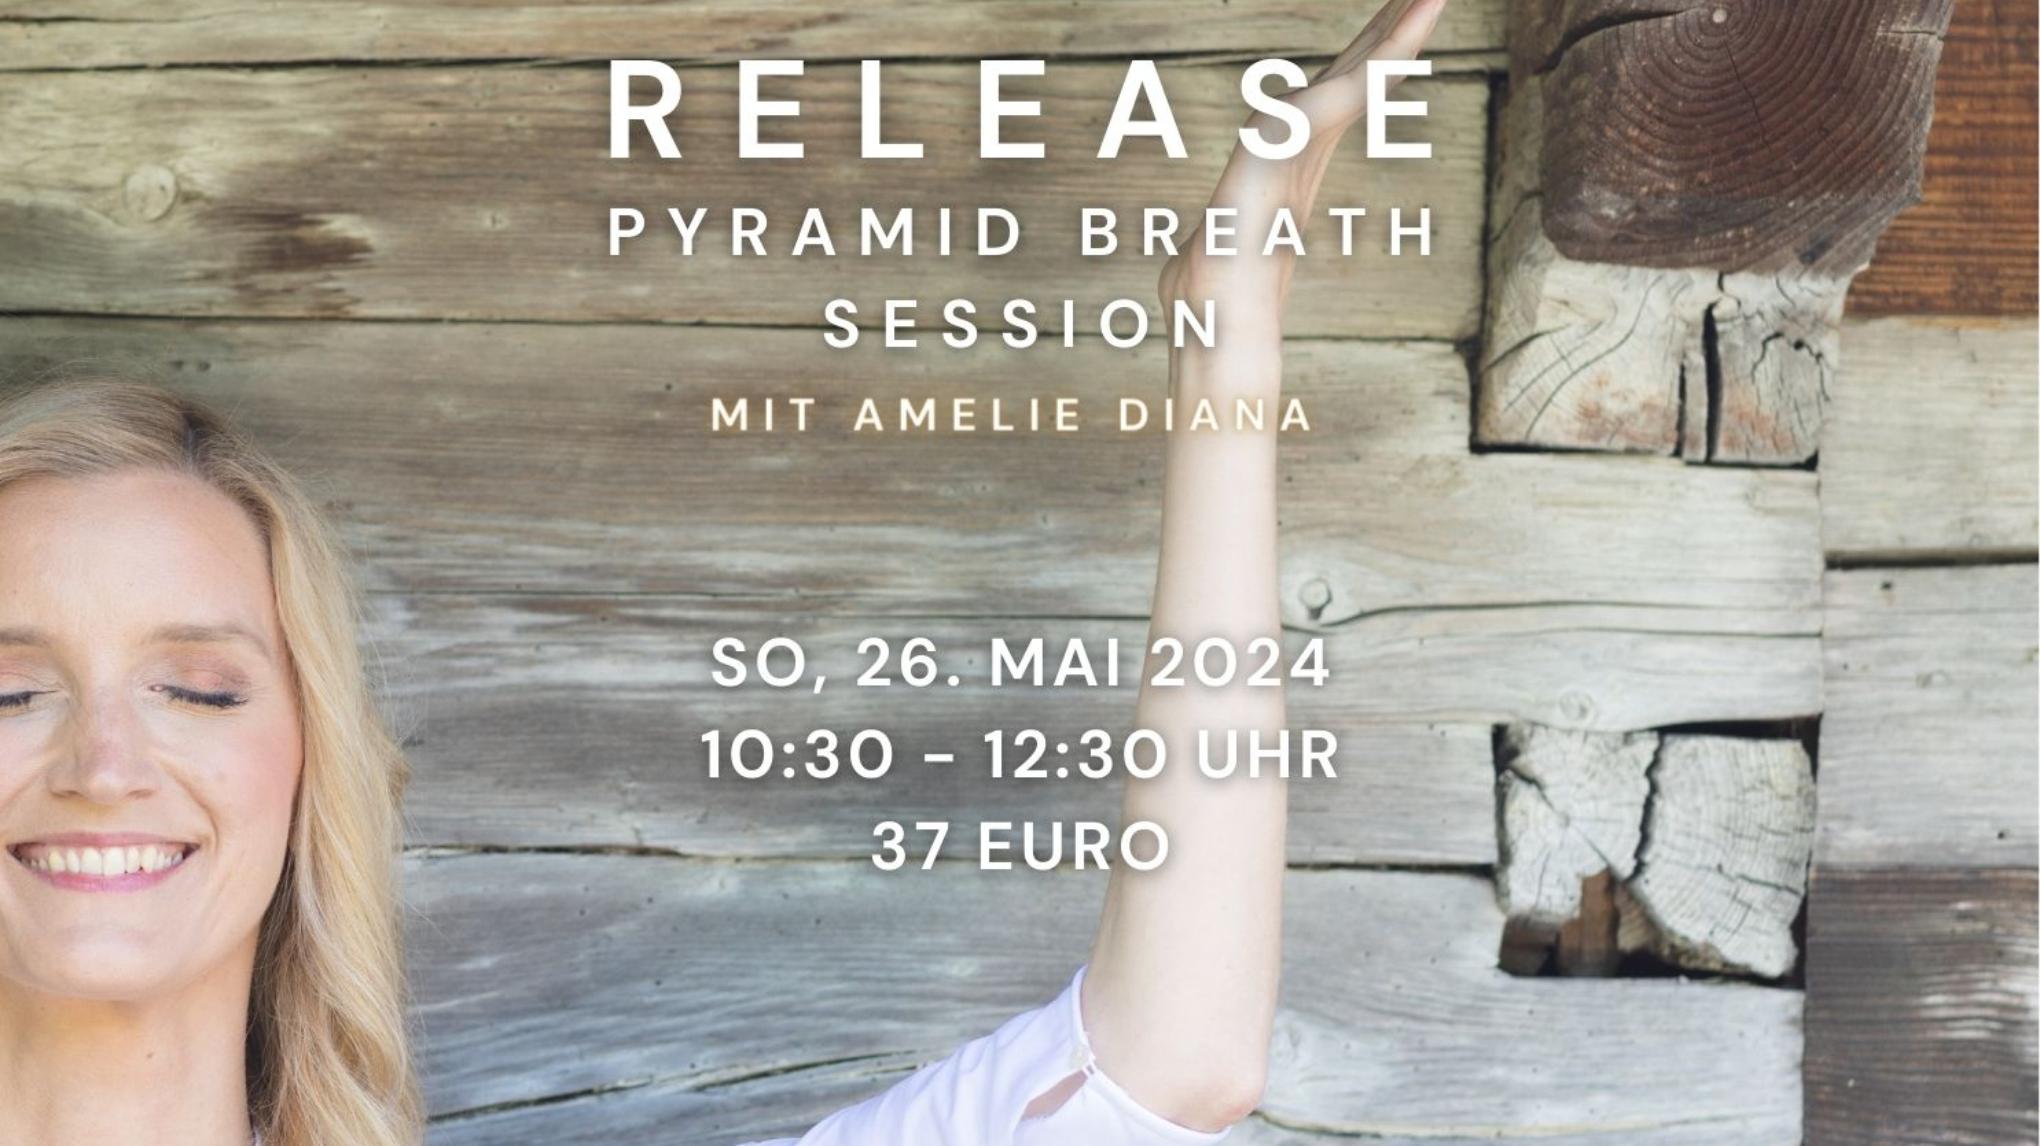 RELEASE - Pyramid Breath Session mit Amelie Diana